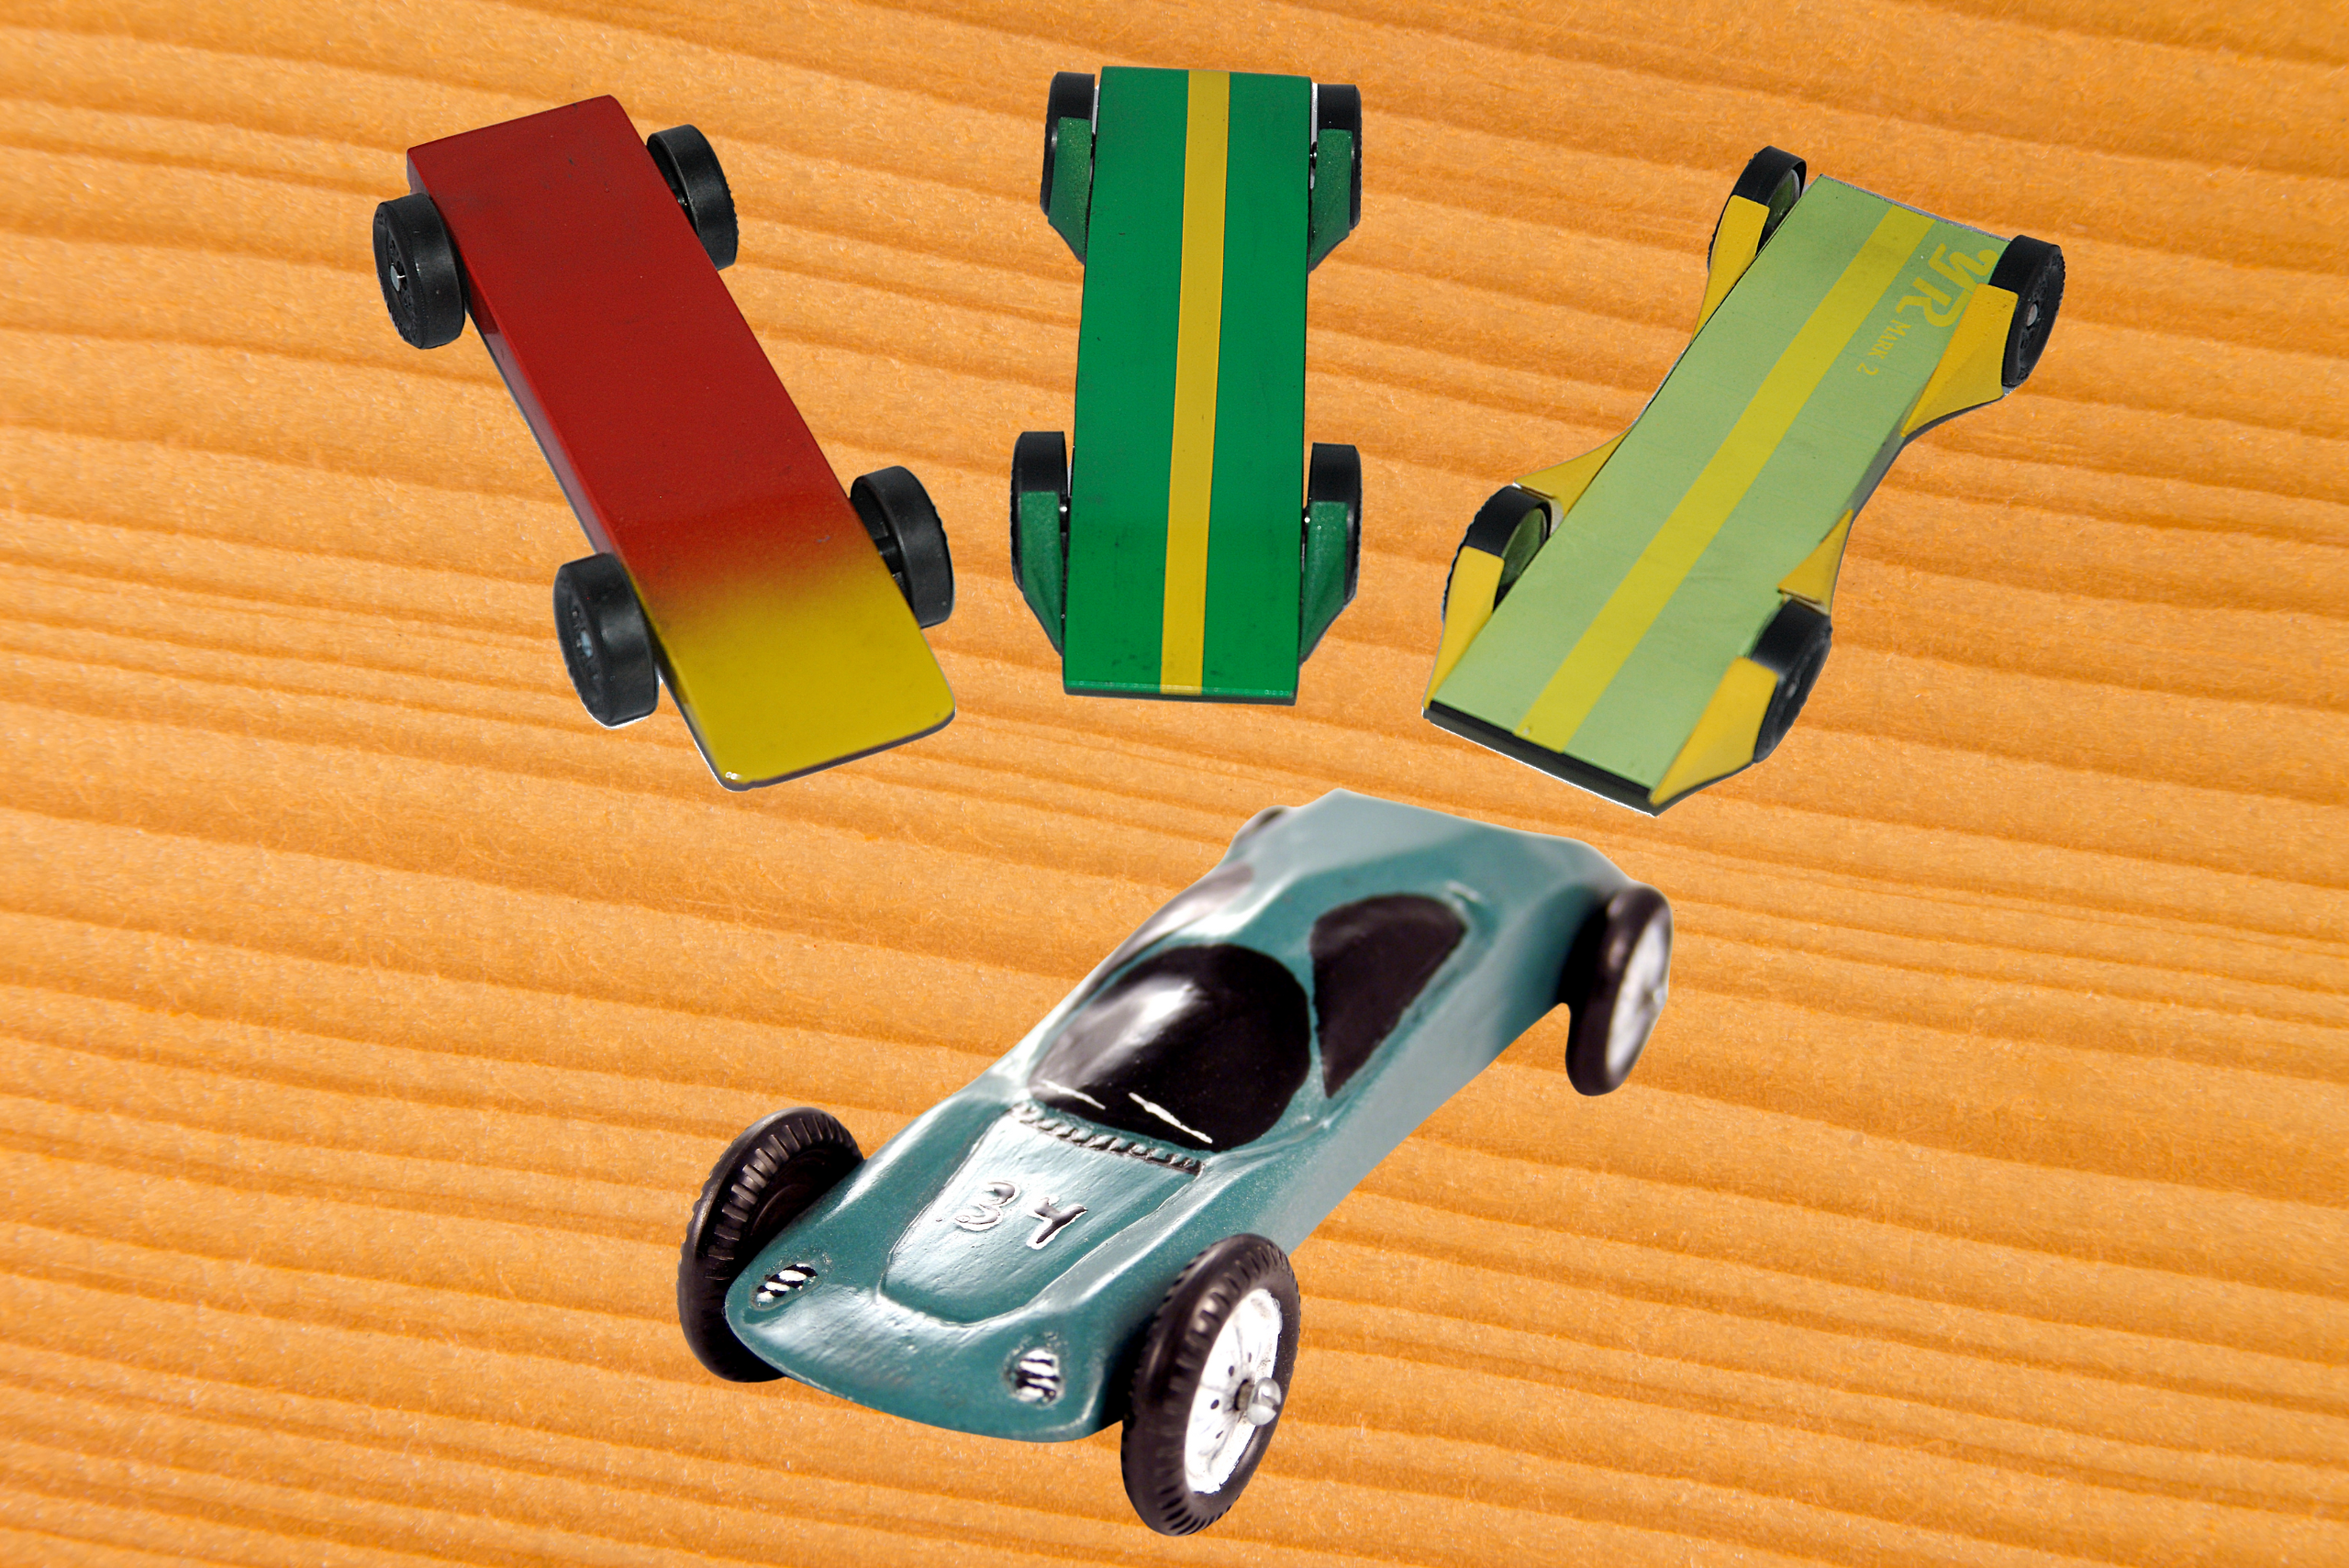 4 pinewood derby car designs on a wooden background.